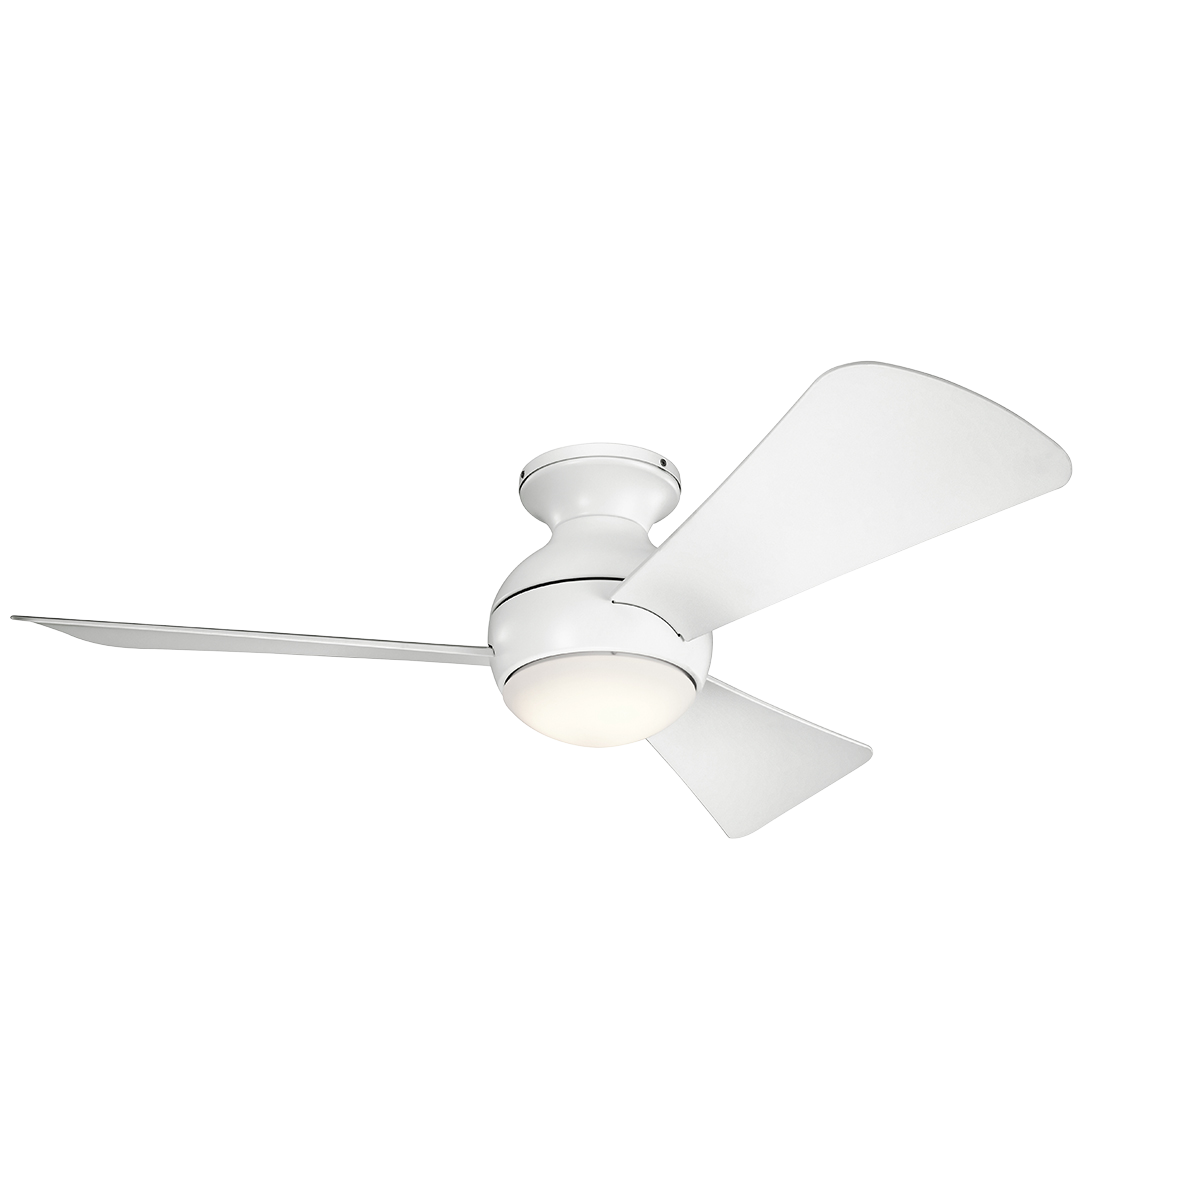 44 Inch Sola Fan in MWH,in. This Matte White 44 inch ceiling fan from the Sola collection which can be used in wet locations, features integrated LED lighting and flush mount installation.  The globe inspired motor housing shape brings delightful style to any space.  A metal fixture cap is included for non light use installations.